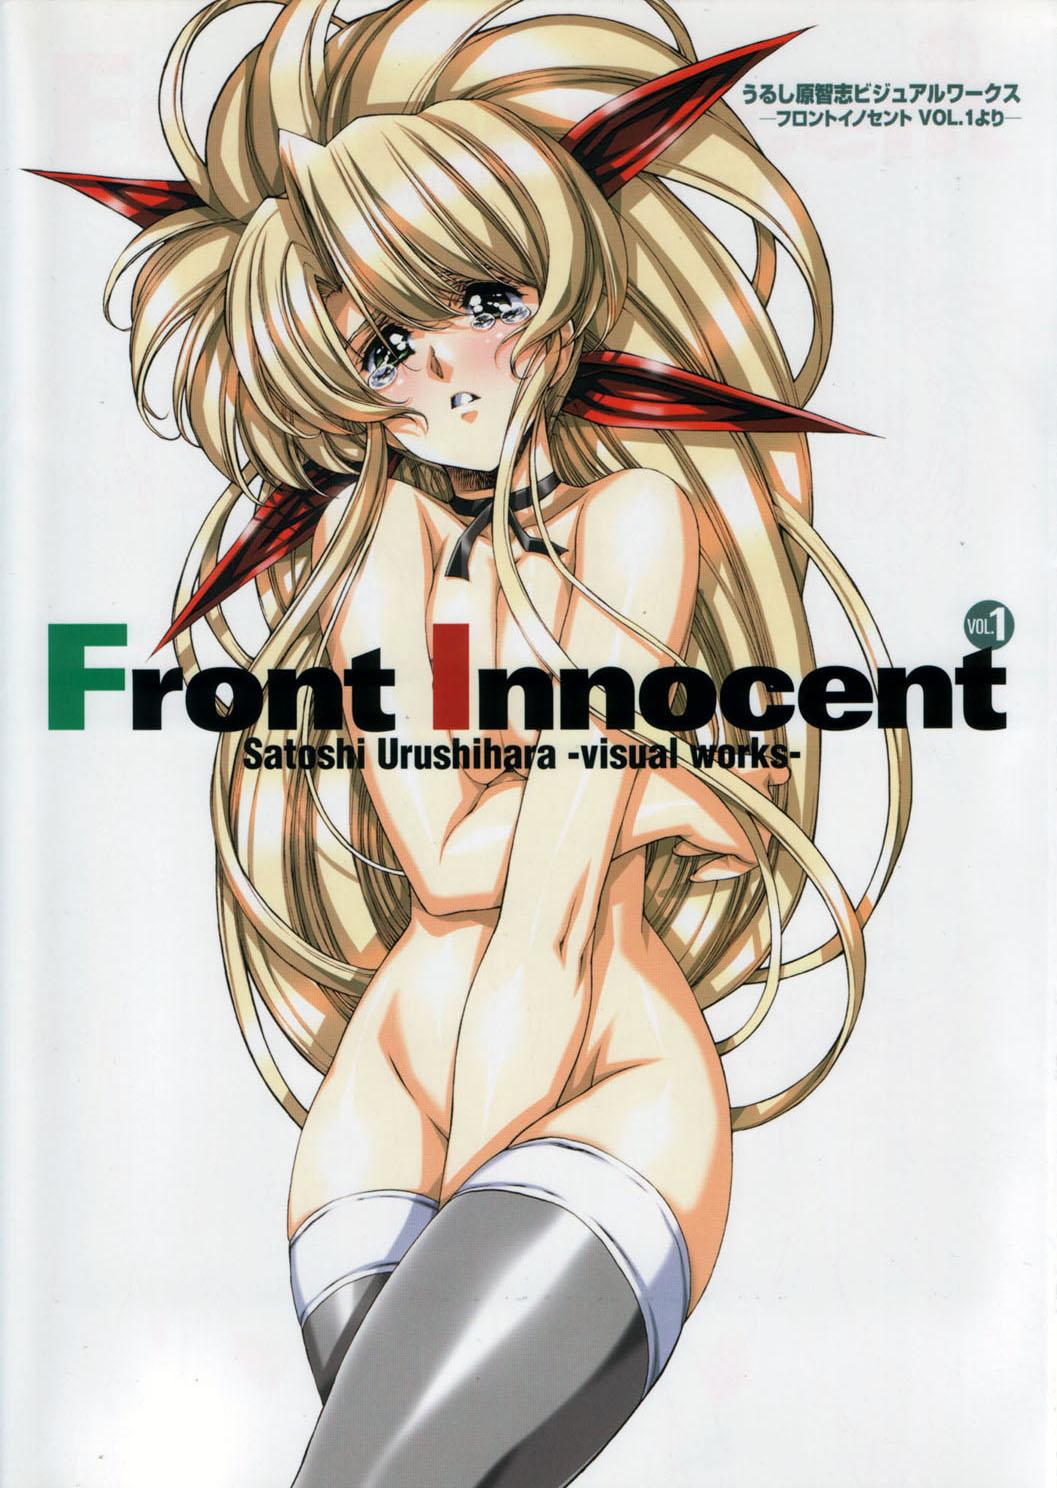 Hairy Front Innocent #1: Satoshi Urushihara Visual Works - Another lady innocent Hot Couple Sex - Page 2